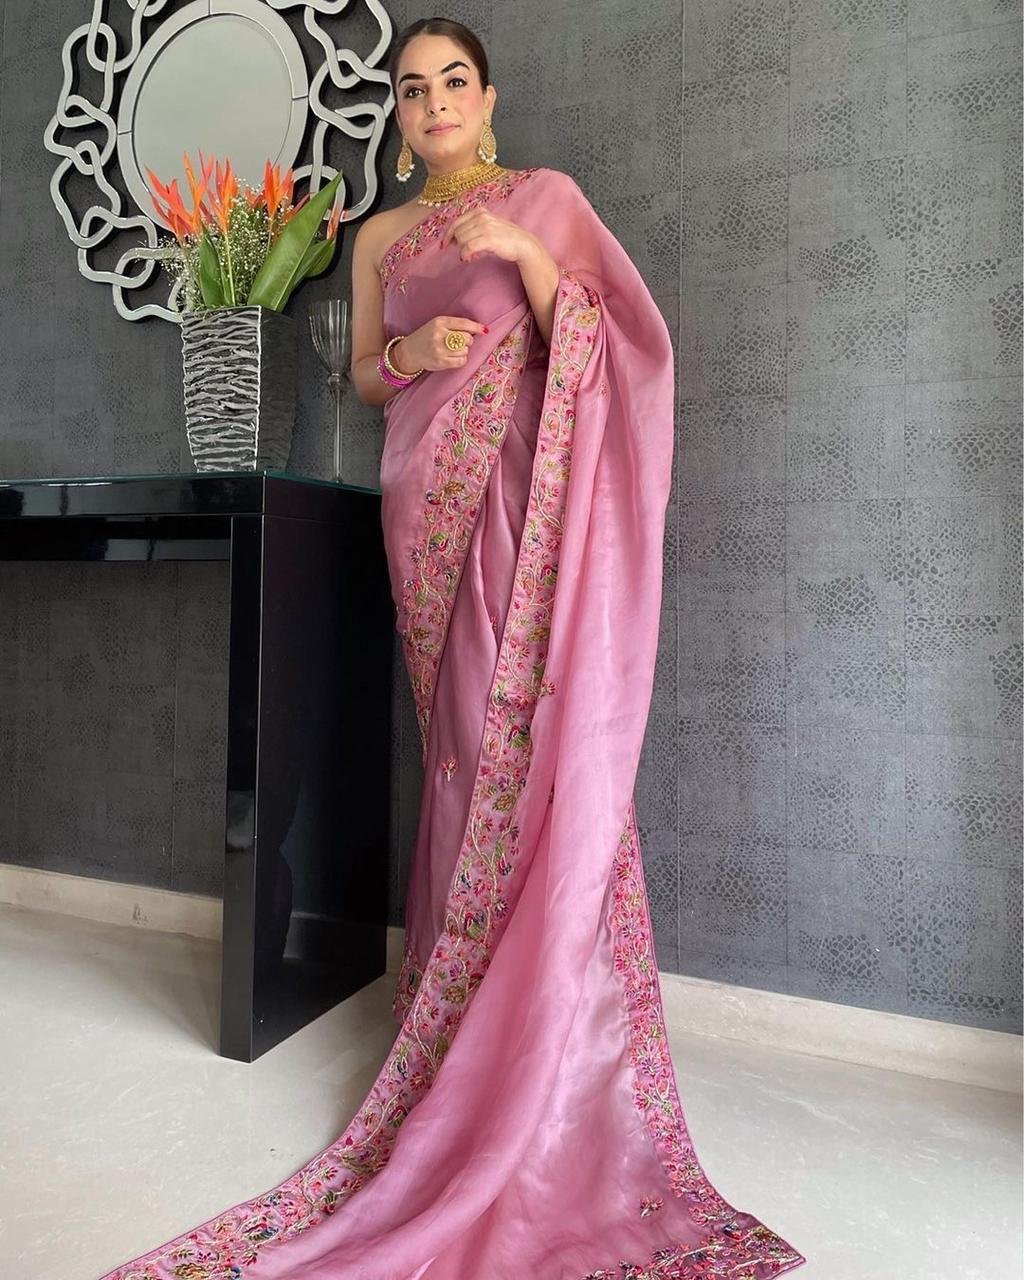 Party Wear Saree Online - Buy Latest Designer Party Sarees At Best ...